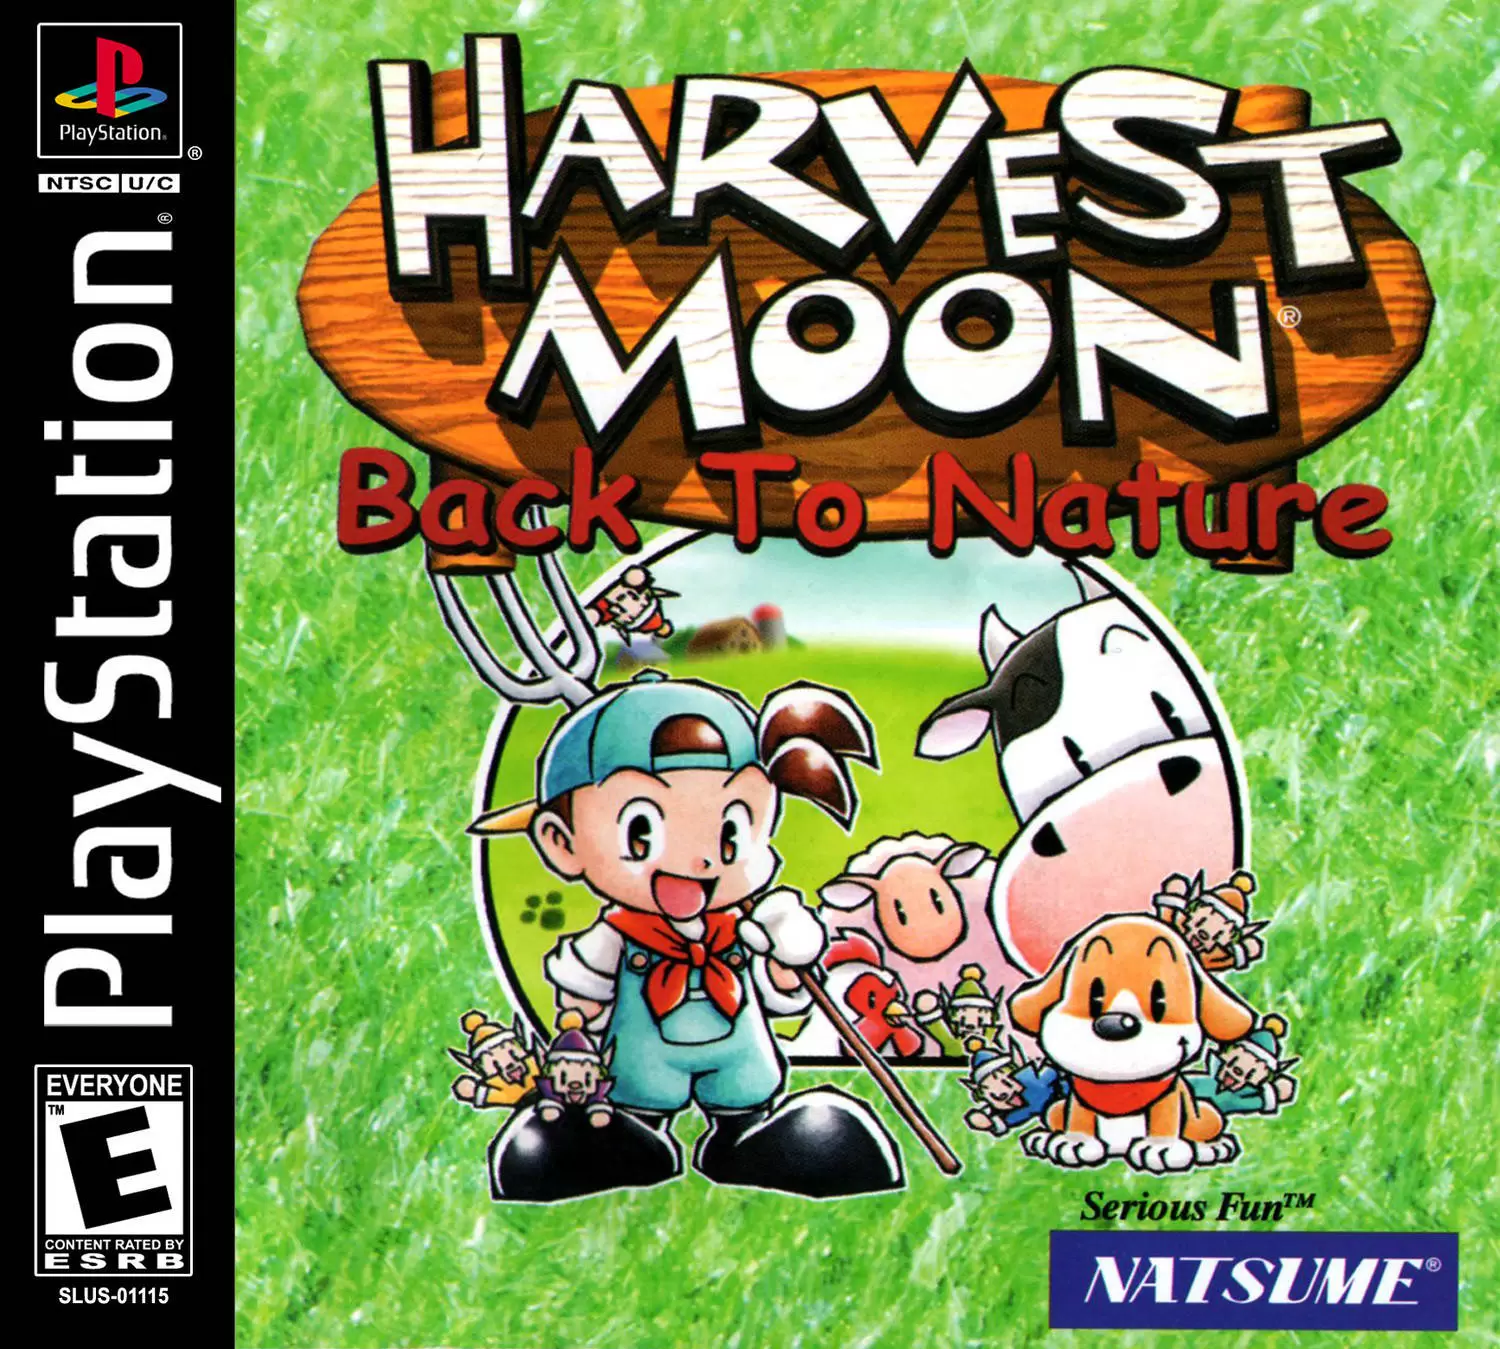 Playstation games - Harvest Moon: Back to Nature